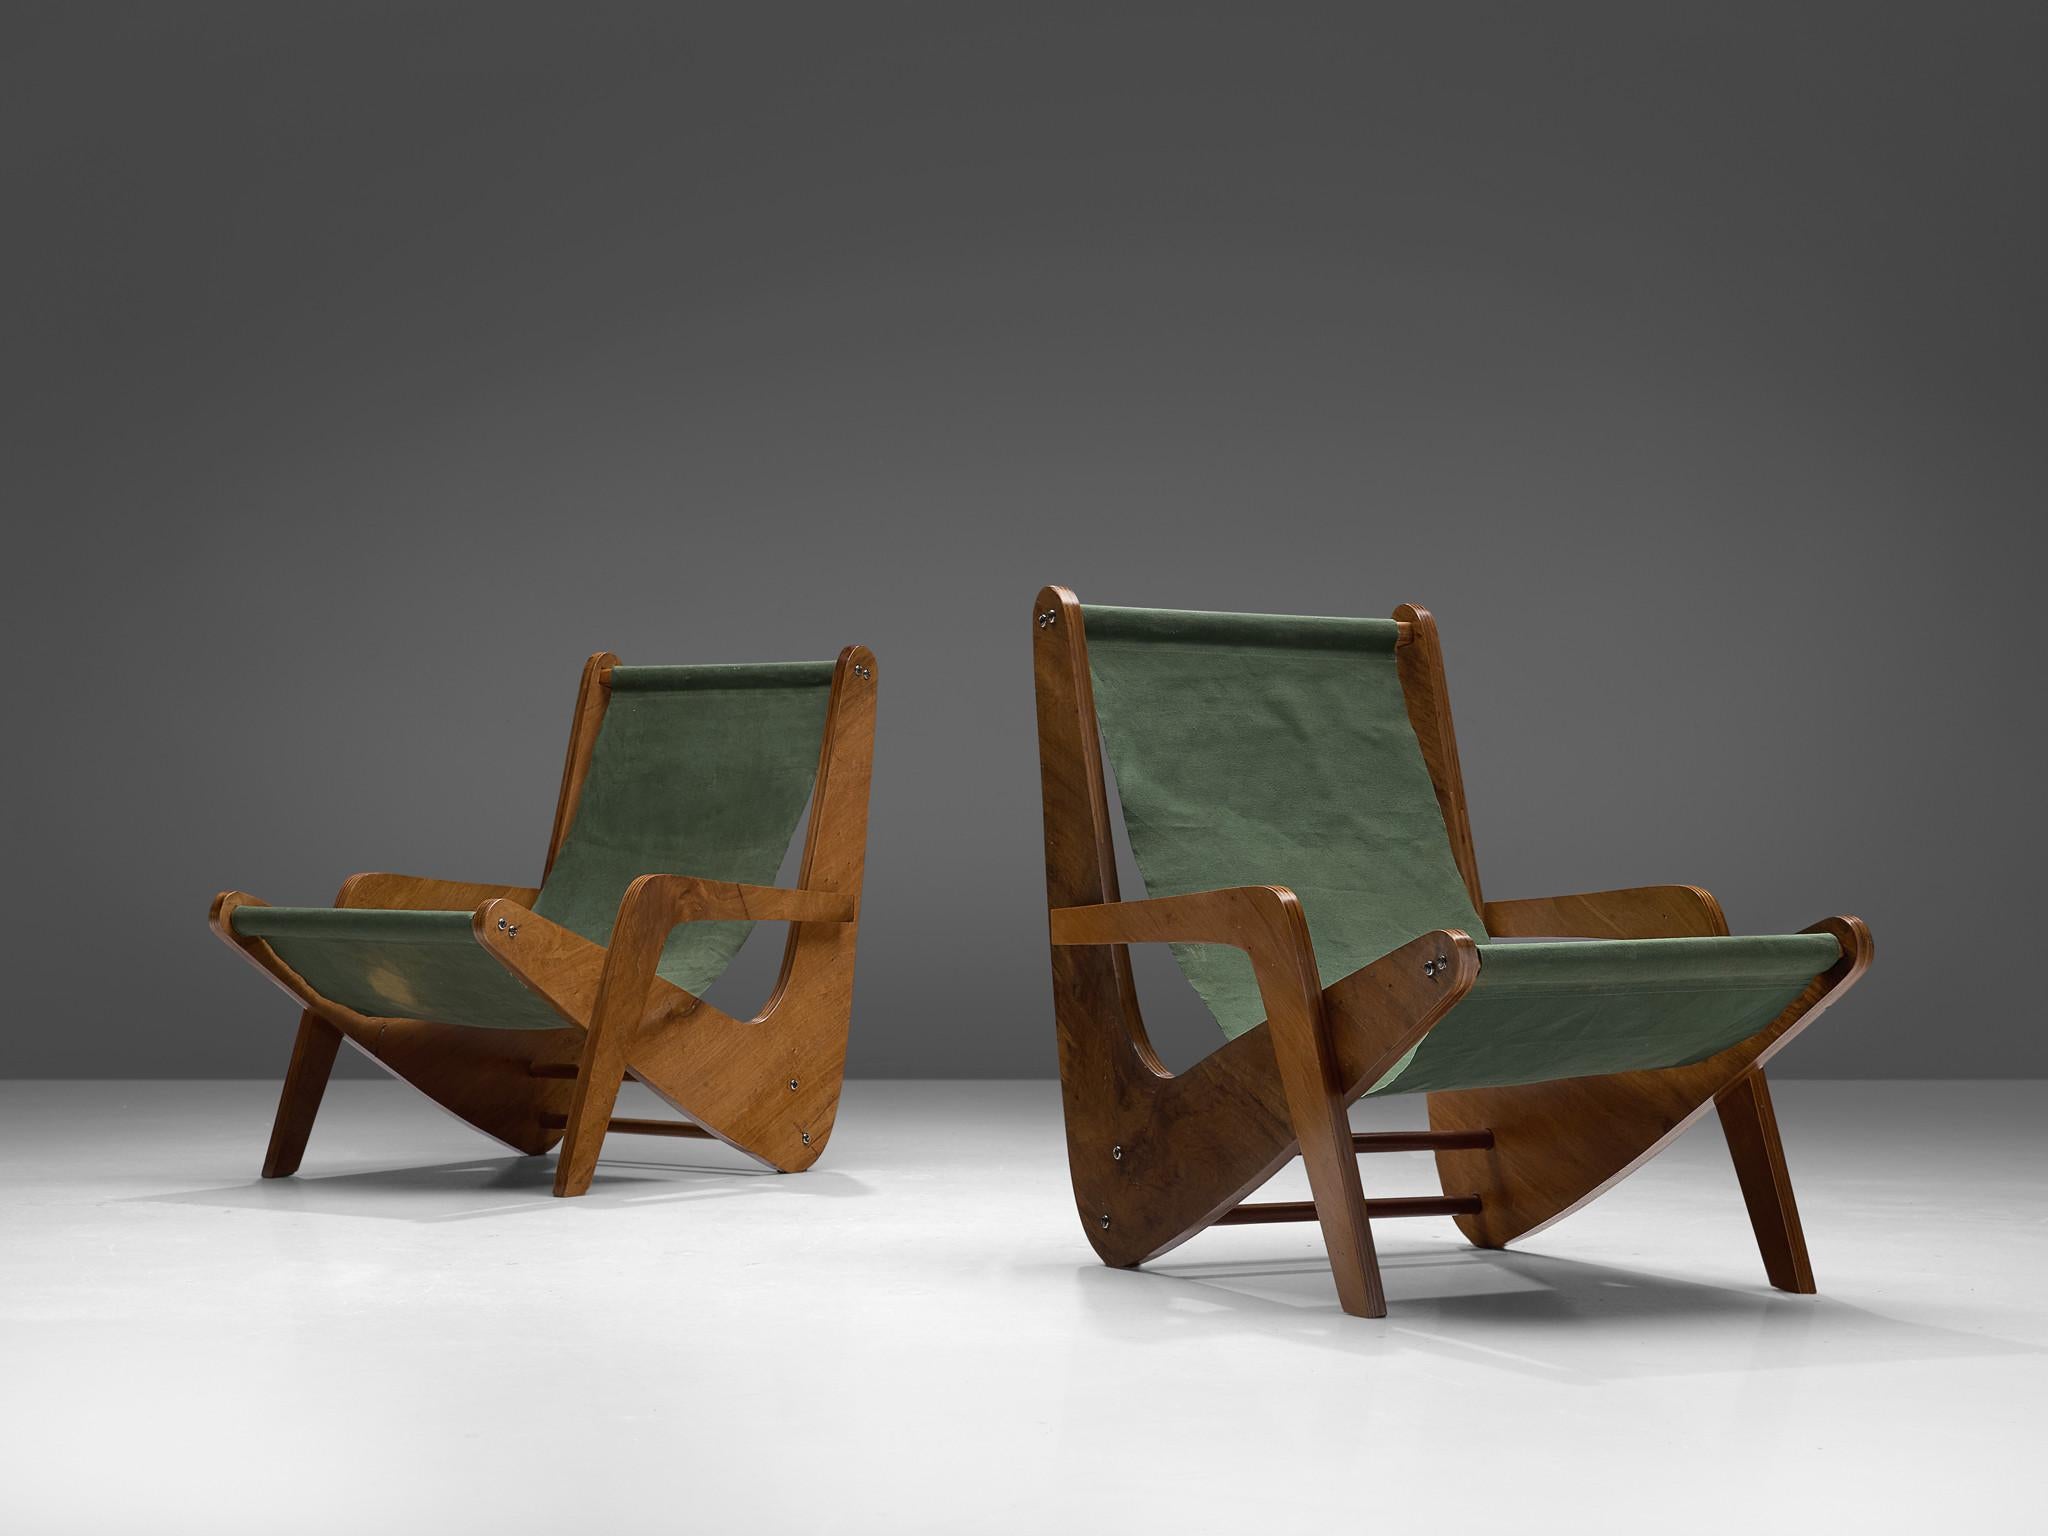 José Zanine Caldas for Móveis Artisticos Z, pair of 'Boomerang' chairs, plywood and fabric, Brazil, 1950s.

This Boomerang lounge chair by José Zanine Caldas emphasizes the innovative use of plywood the designer is known for in his earlier years.